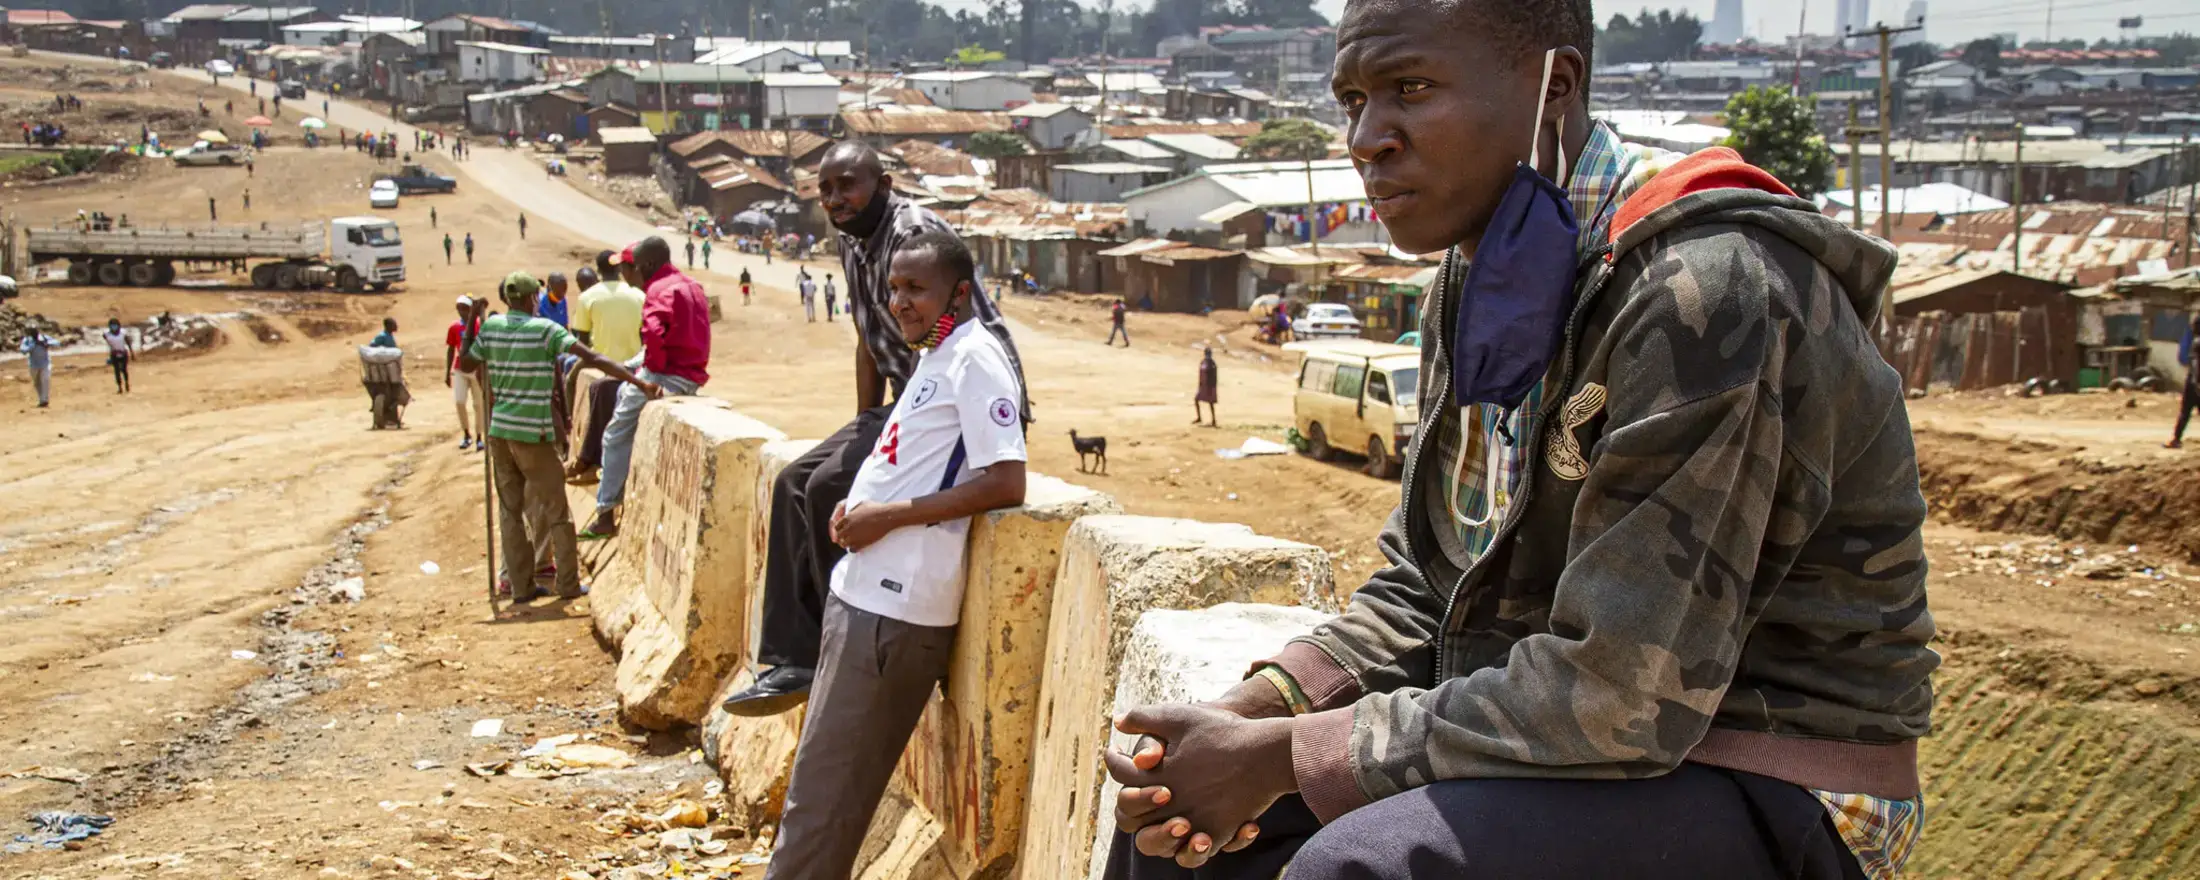 Field visit in Kibera slum, Nairobi, Kenya during COVID-19, area which was demolished and evicted in Kibera in 2018 to build a road straight through the settlement